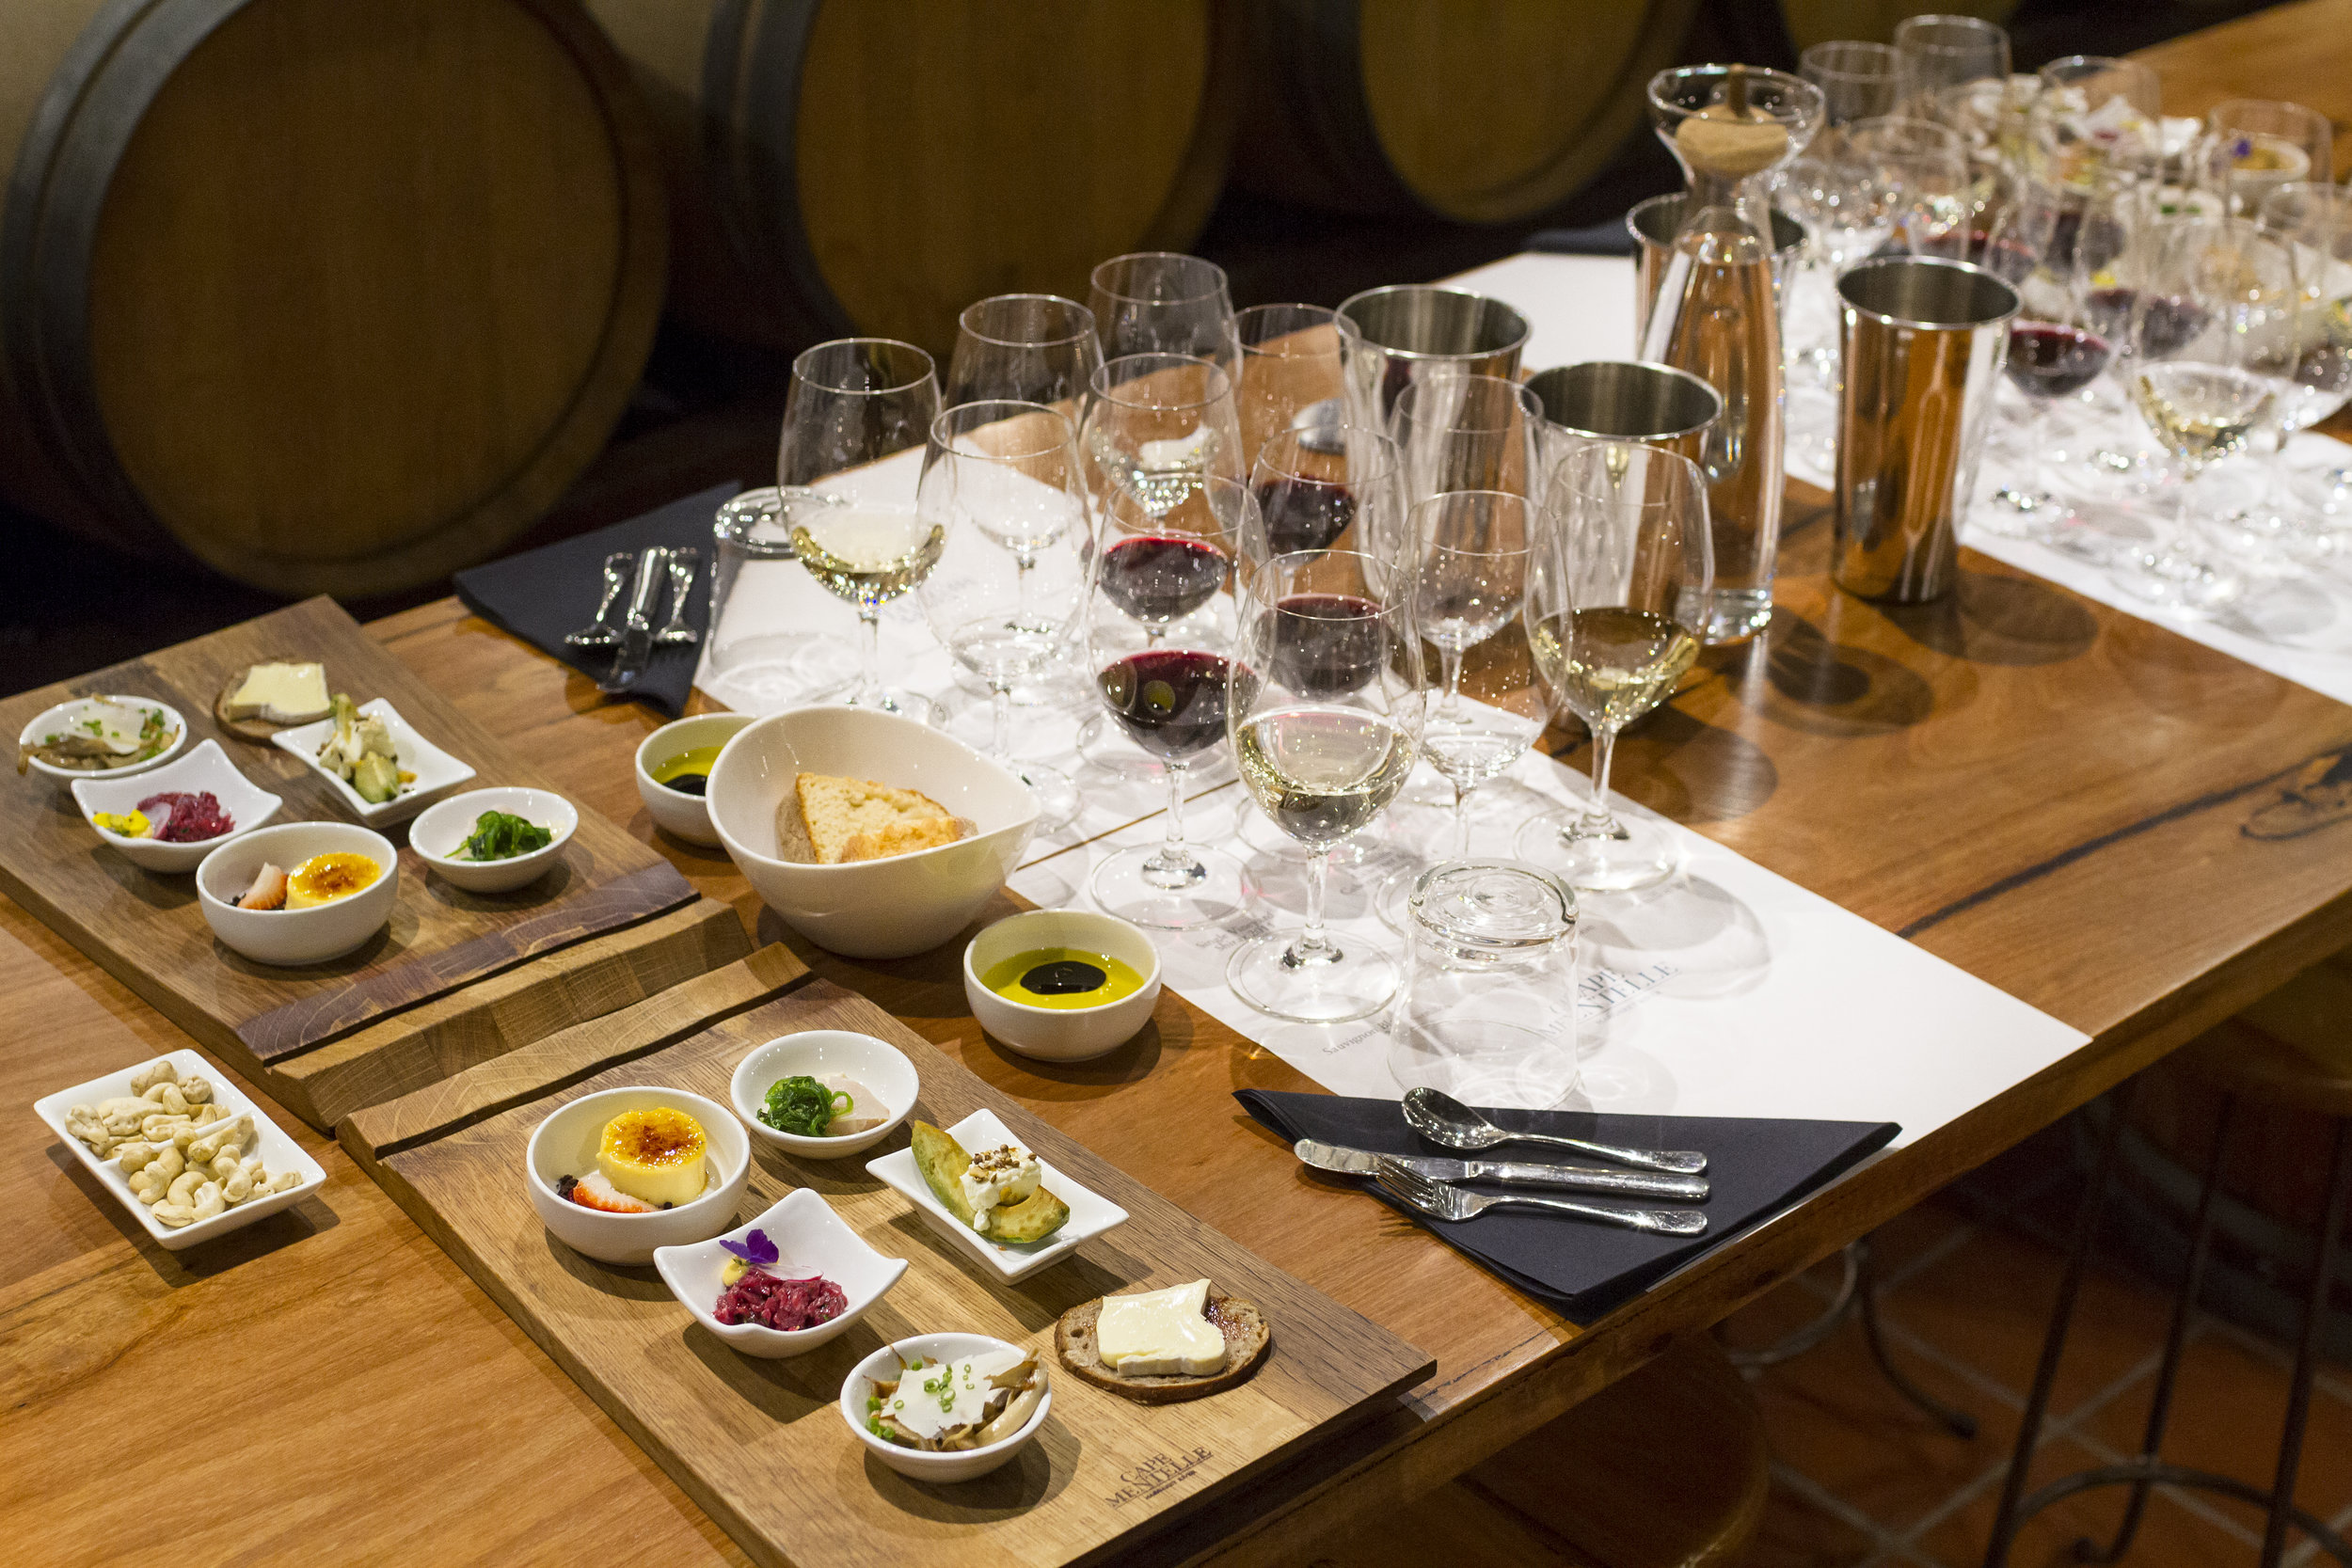  A behind the scenes tour at one of the regions founding five wineries followed by a private tasting of six wines matched to a selection of delicious local produce, hosted in the historic Cape Mentelle barrel cellar.   